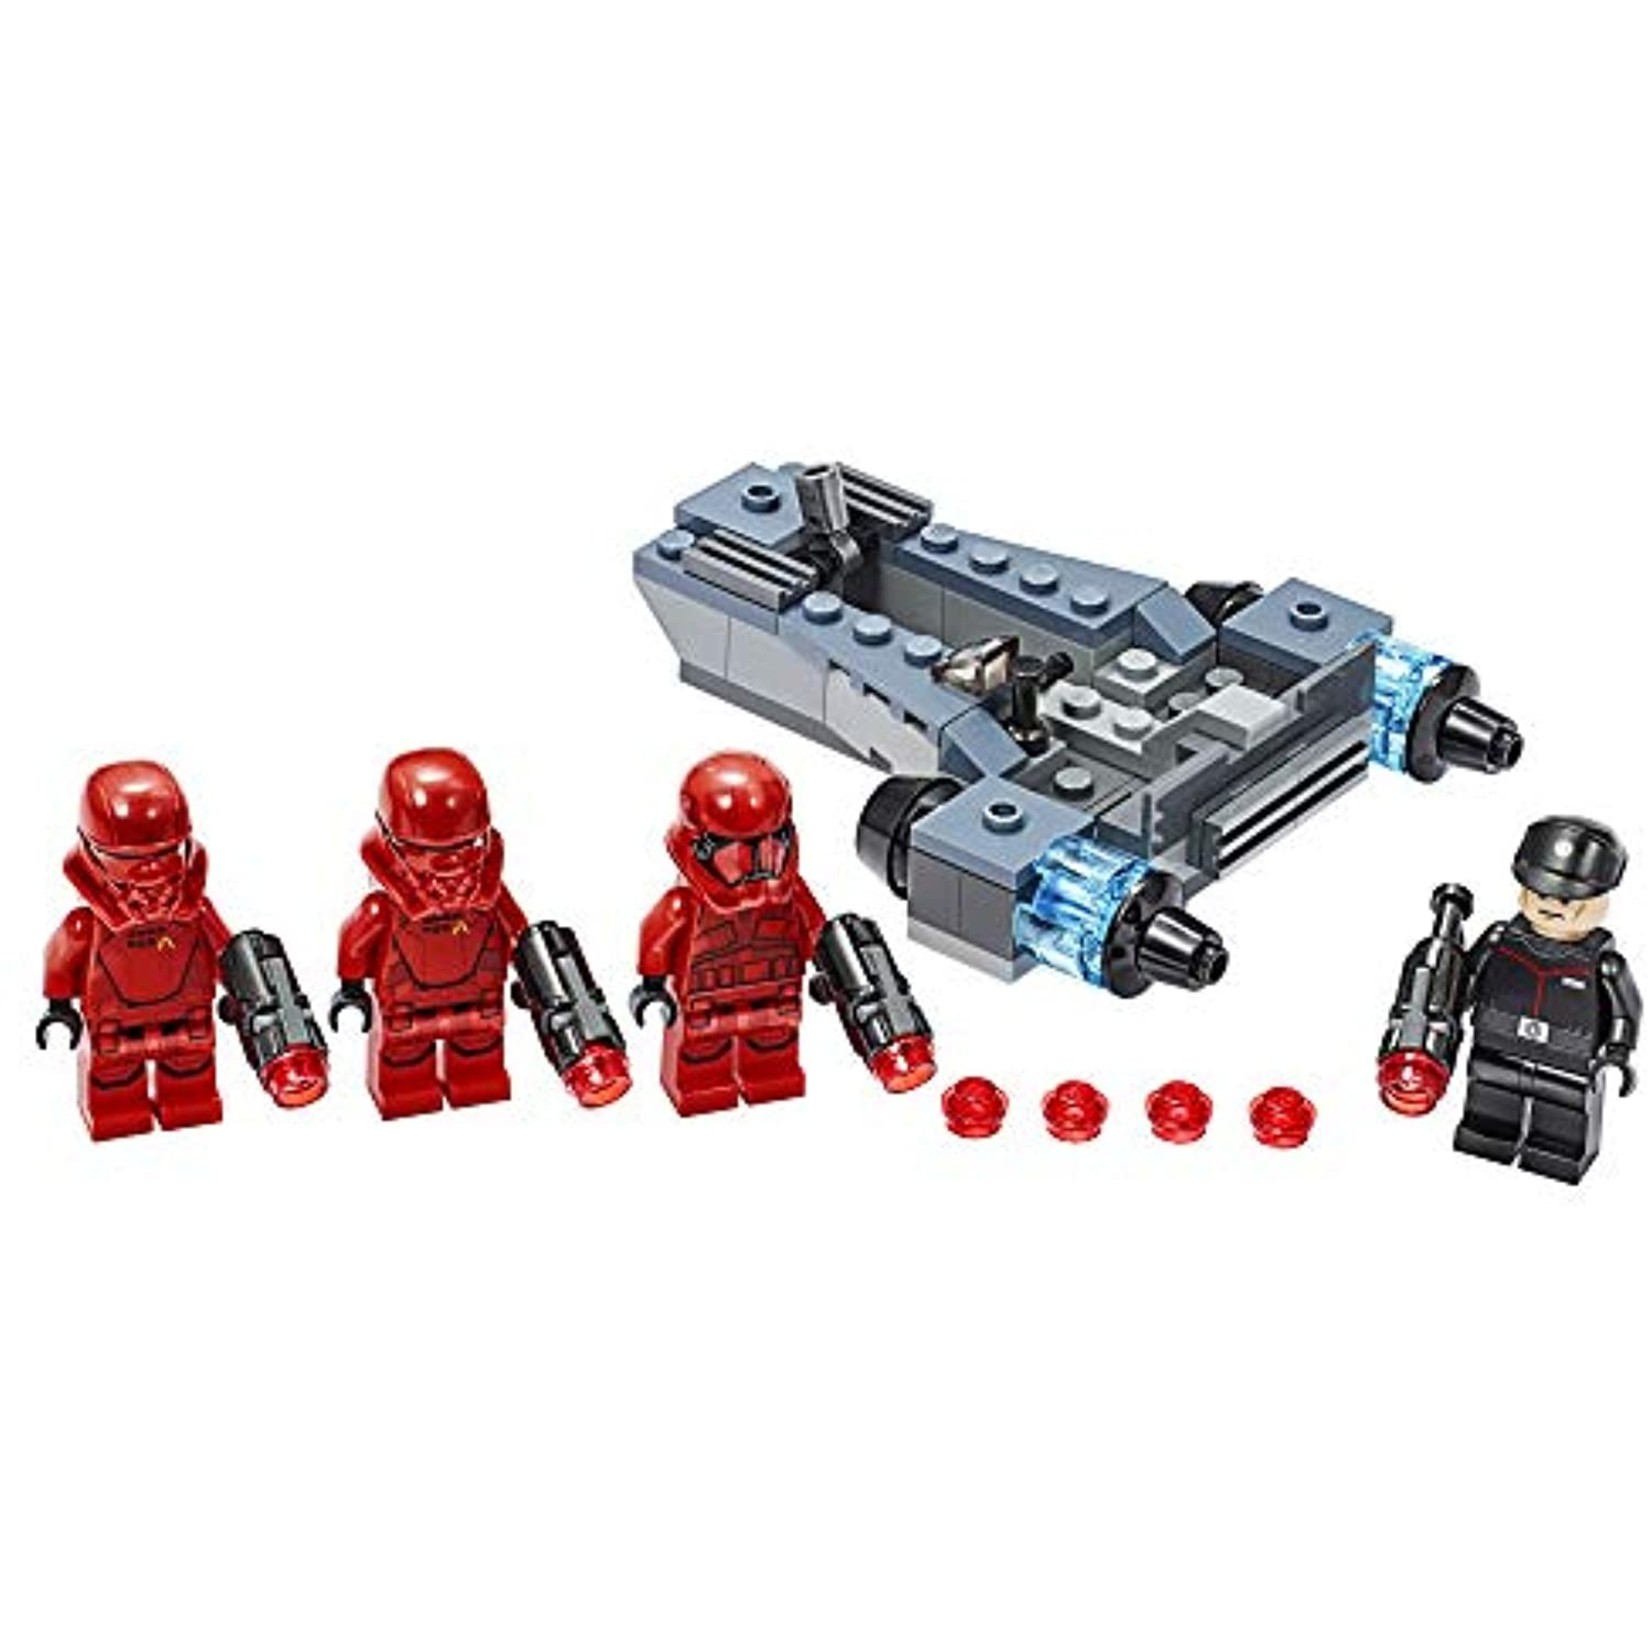 LEGO LEGO Sith Troopers Battle Pack 75266